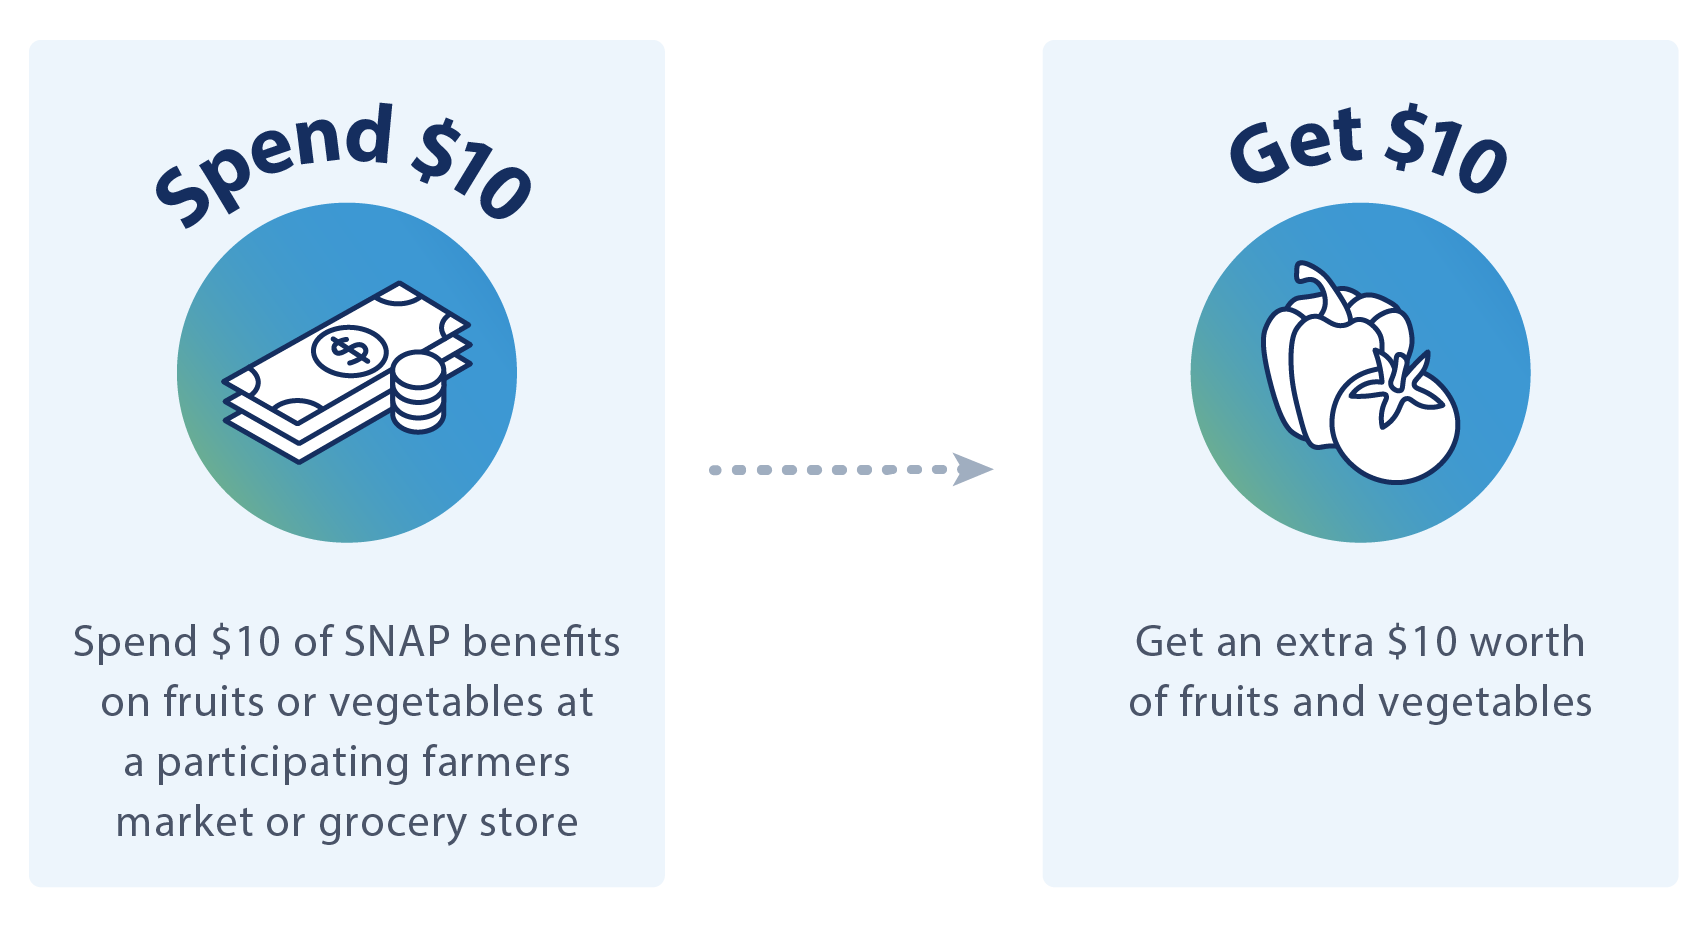 Spend $10 of SNAP benefits at a participating farmers market or grocery store to get $20 worth of fruits and vegetables.